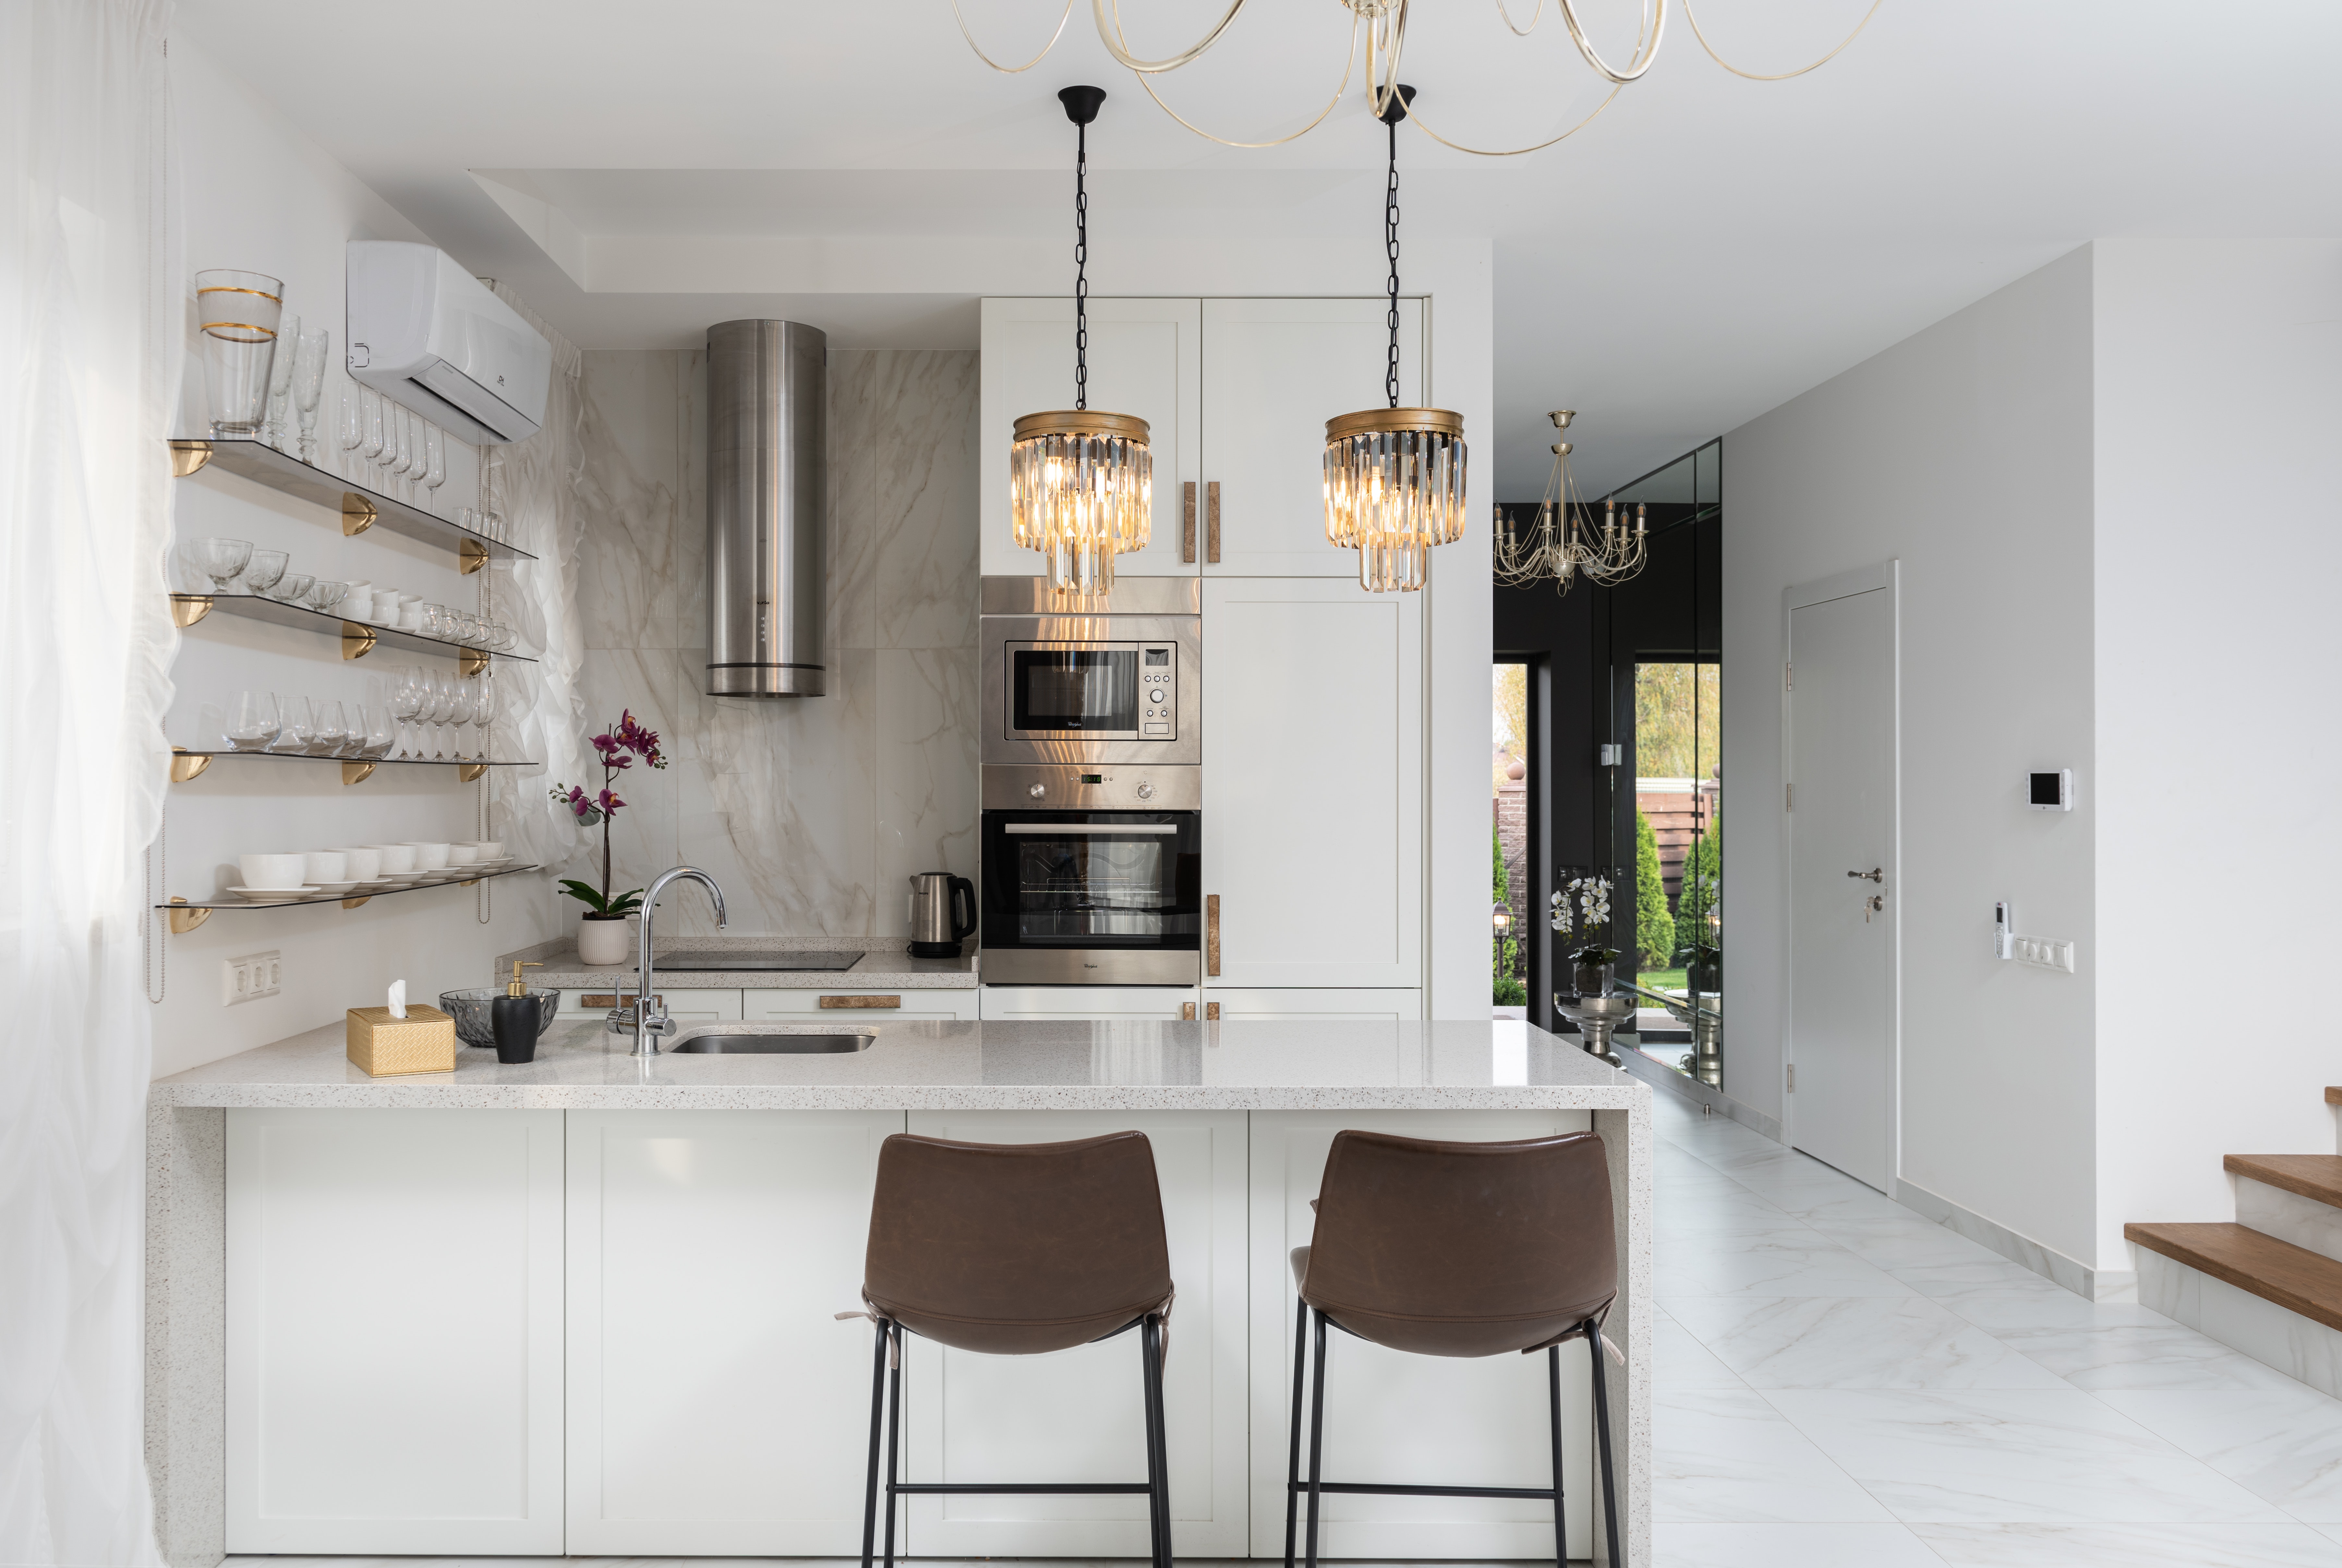 Stock Photo featuring white marble kitchen with designer elements.